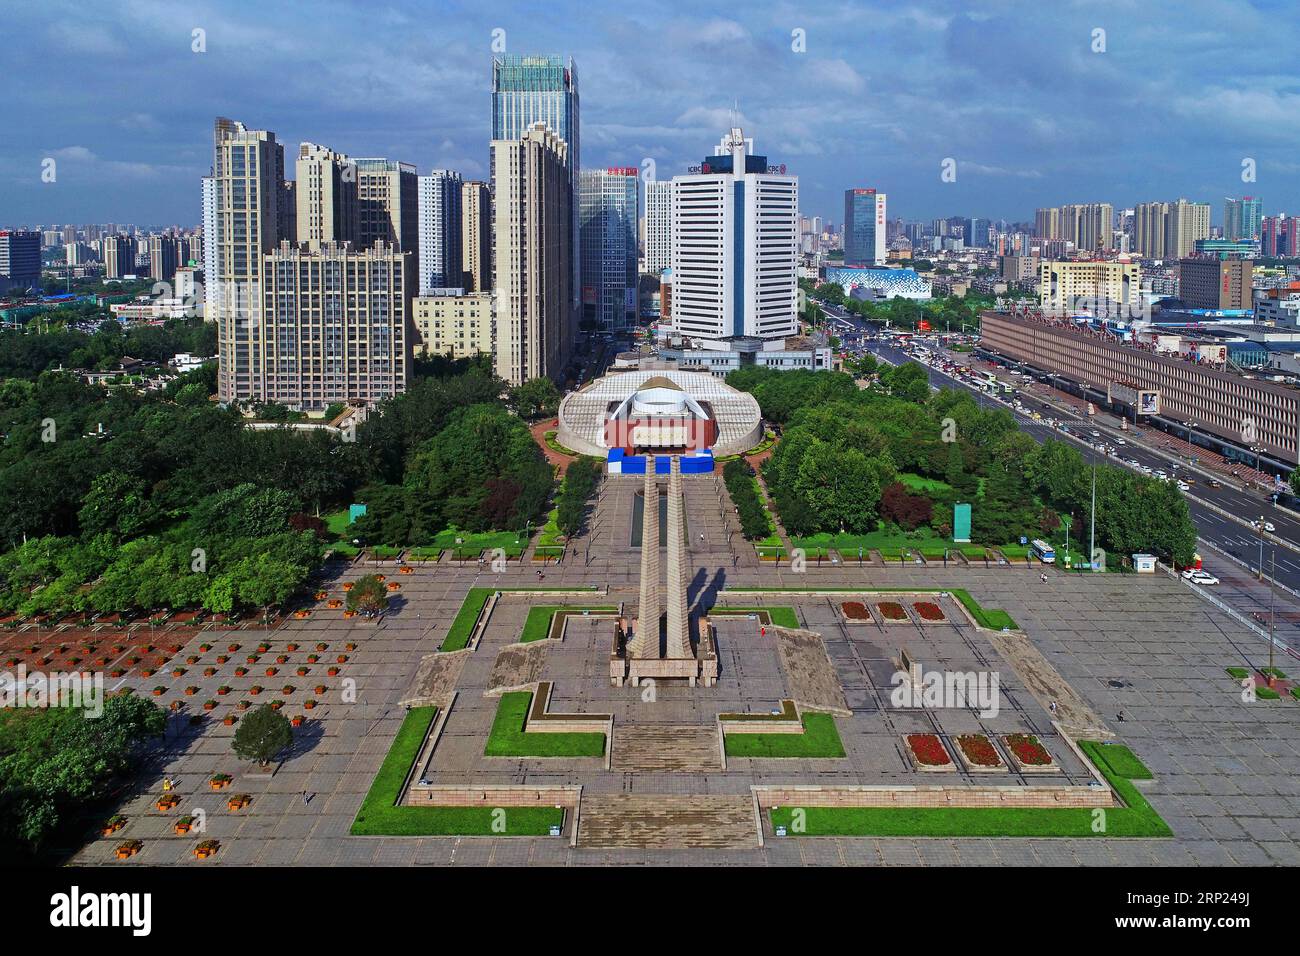 (180817) -- TANGSHAN, Aug. 17, 2018 (Xinhua) -- Photo taken on Aug. 15, 2018 shows the aerial view of the Earthquake Monument square in Tangshan, north China s Hebei Province. In the early hours of July 28, 1976, a 7.8-magnitude earthquake struck the city in Hebei Province, killing over 242,000 people. (Xinhua/Dong Jun) CHINA-HEBEI-TANGSHAN-AERIAL VIEW (CN) PUBLICATIONxNOTxINxCHN Stock Photo